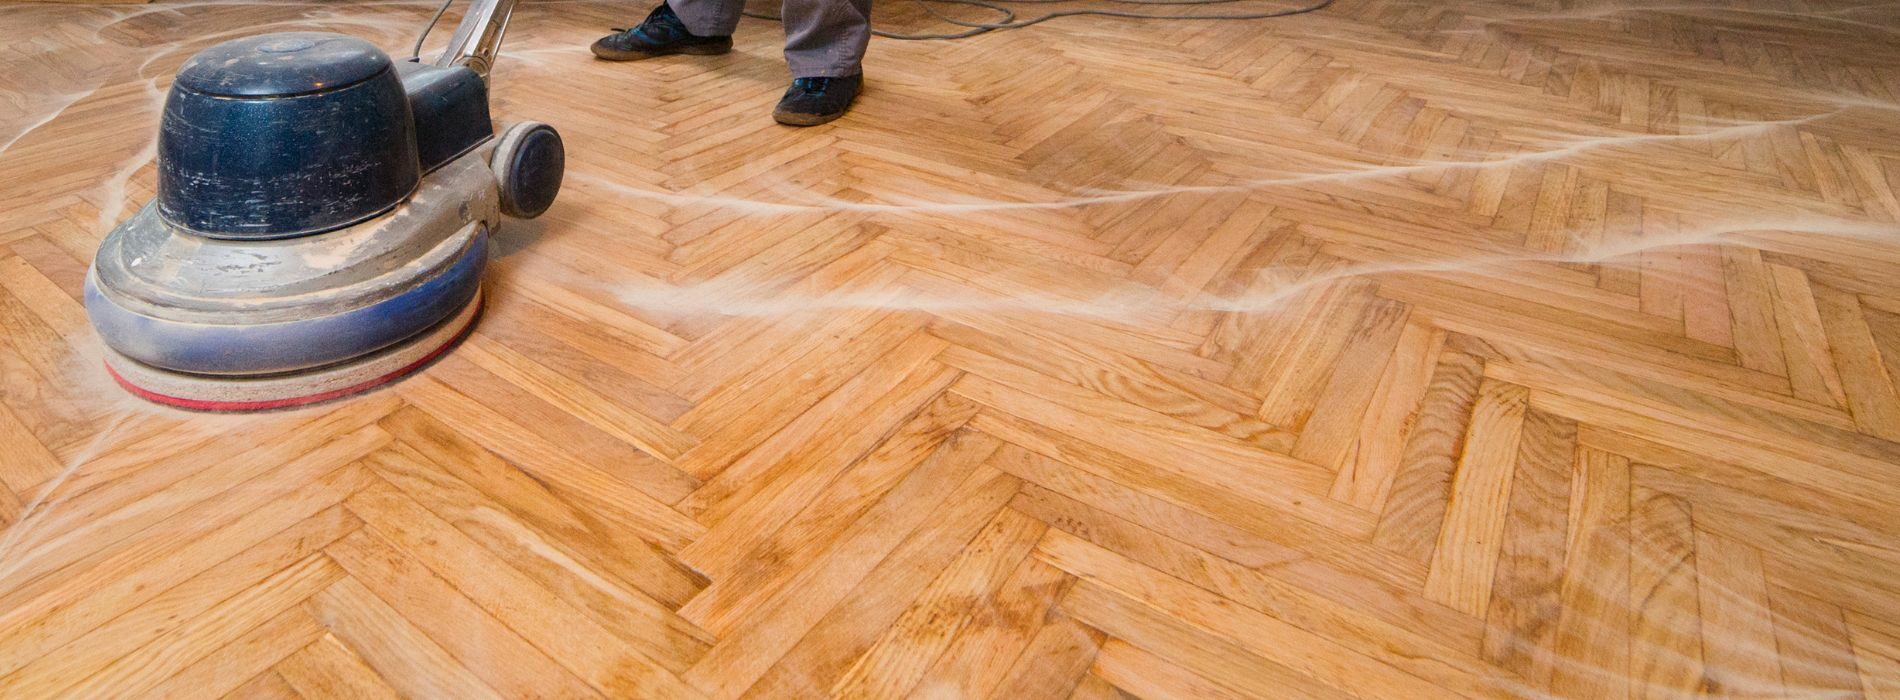 a person using a floor sander on a wooden floor.